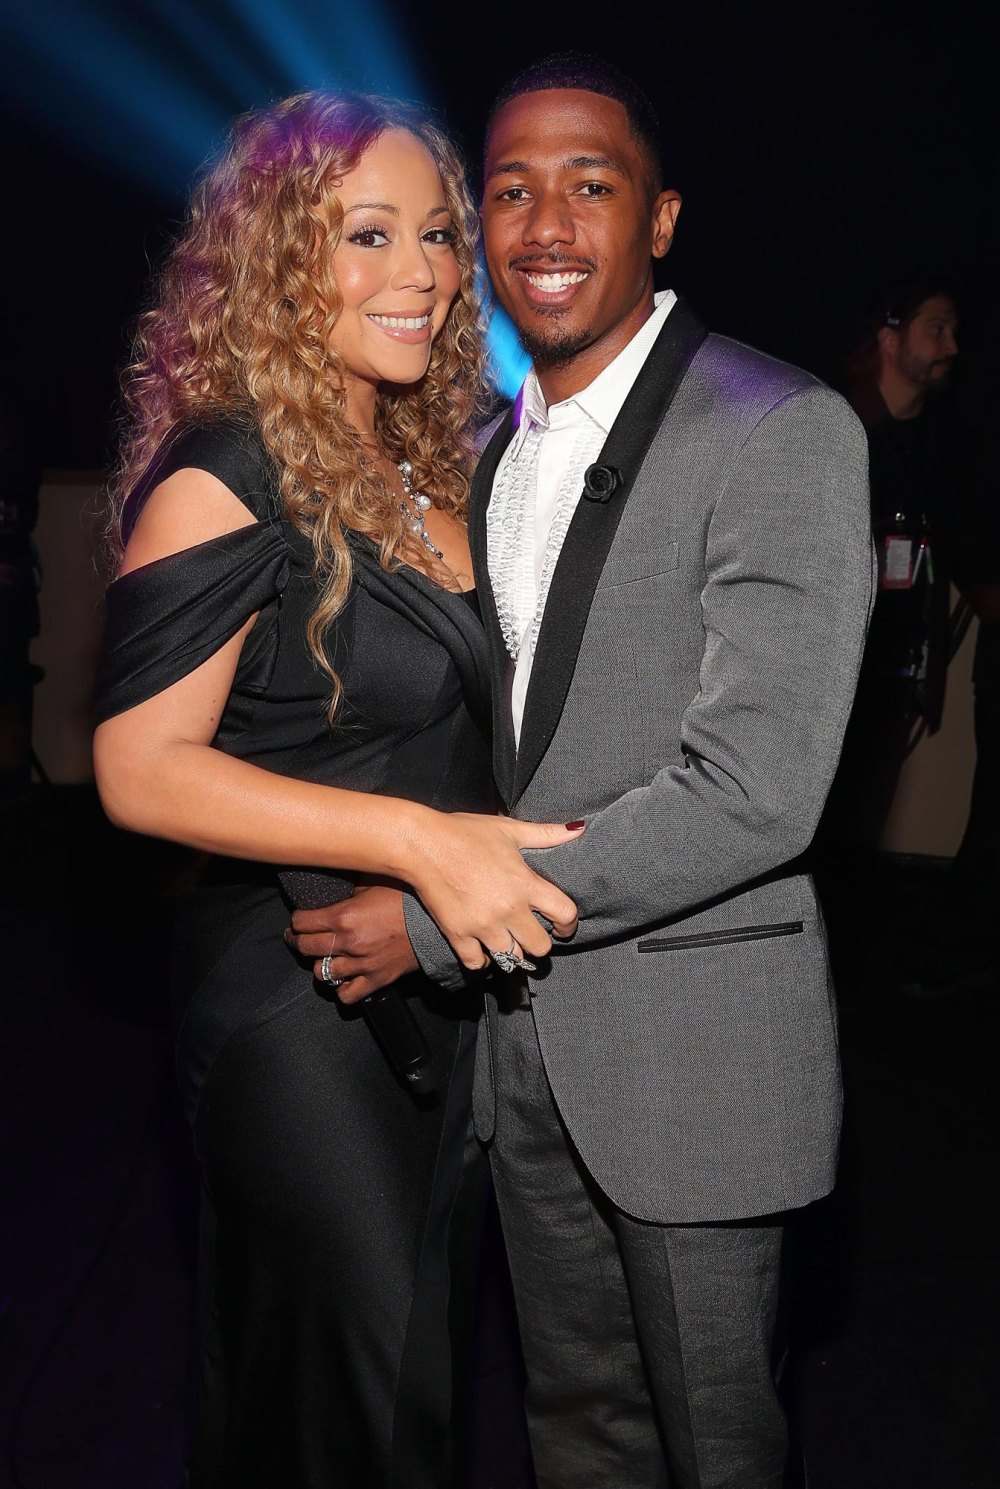 Nick Cannon Reacts to the Possibility of a Reconciliation With His Ex Wife Mariah Carey 858